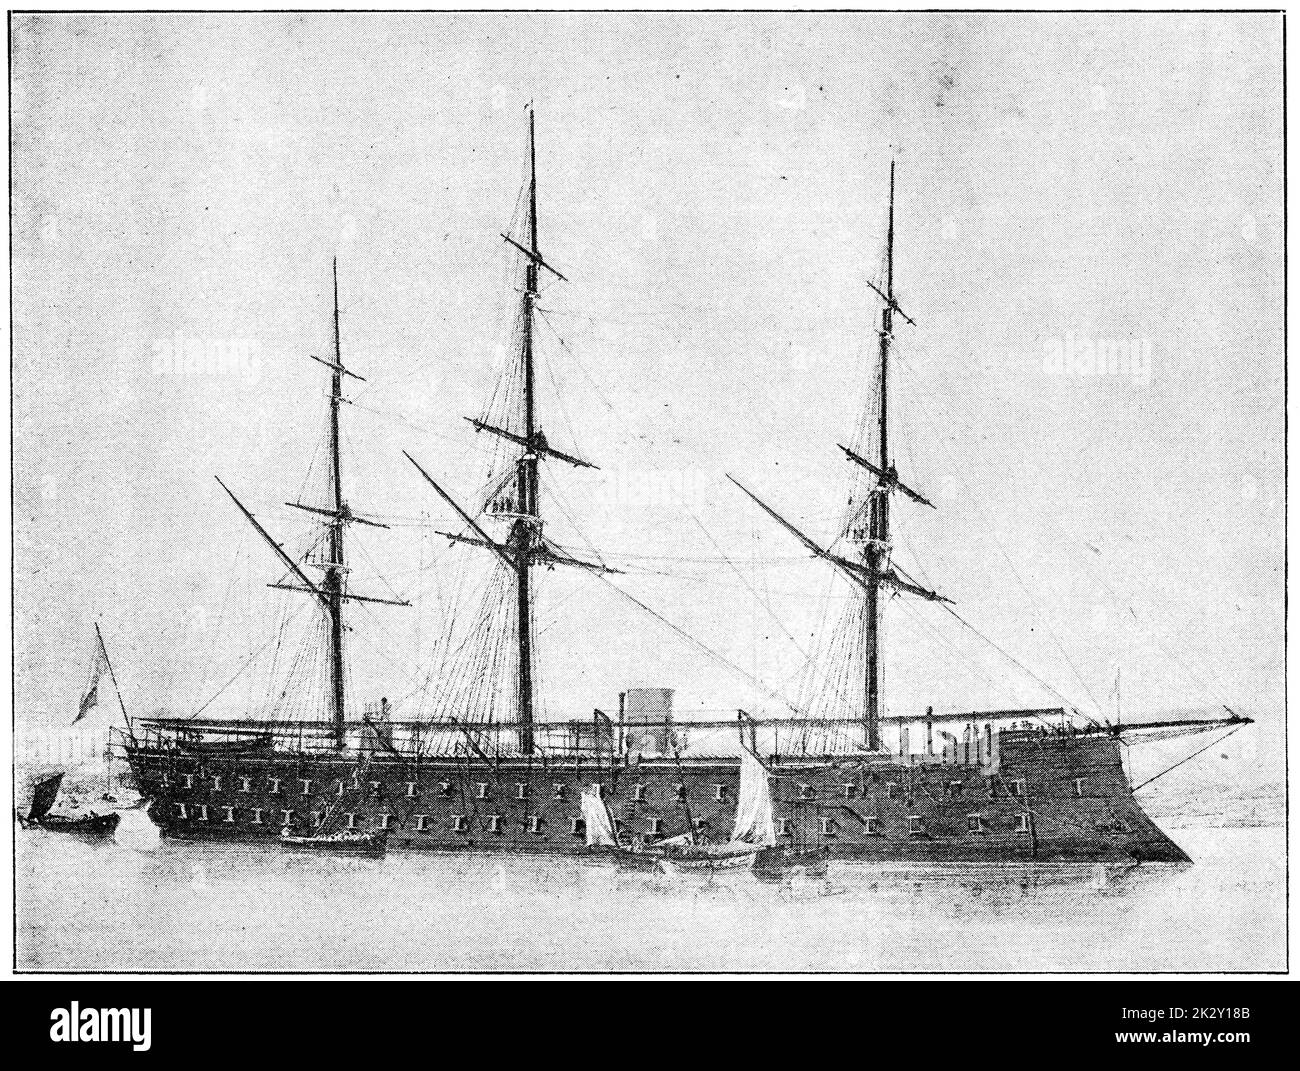 Magenta (1861) - the lead ship of her class of two broadside ironclads built for the French Navy. Illustration of the 19th century. Germany. White background. Stock Photo